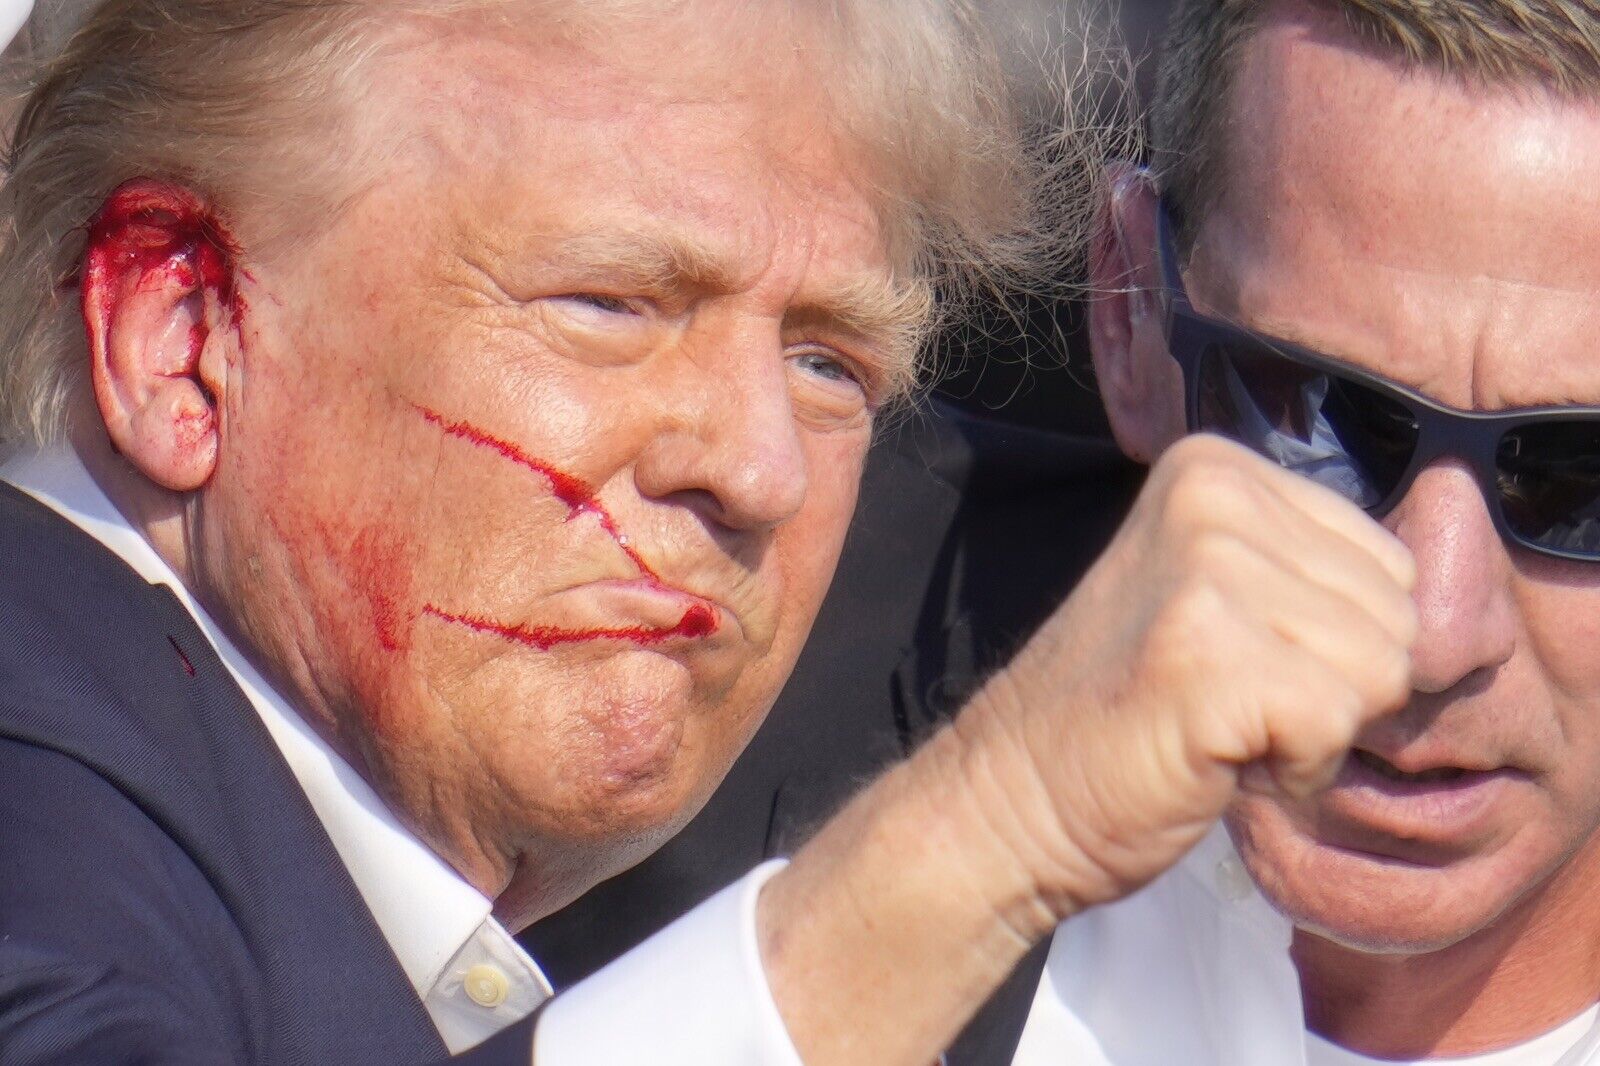 TRUMP CLOSE UP AFTER BEING SHOT 4x6 Glossy Printed Photo